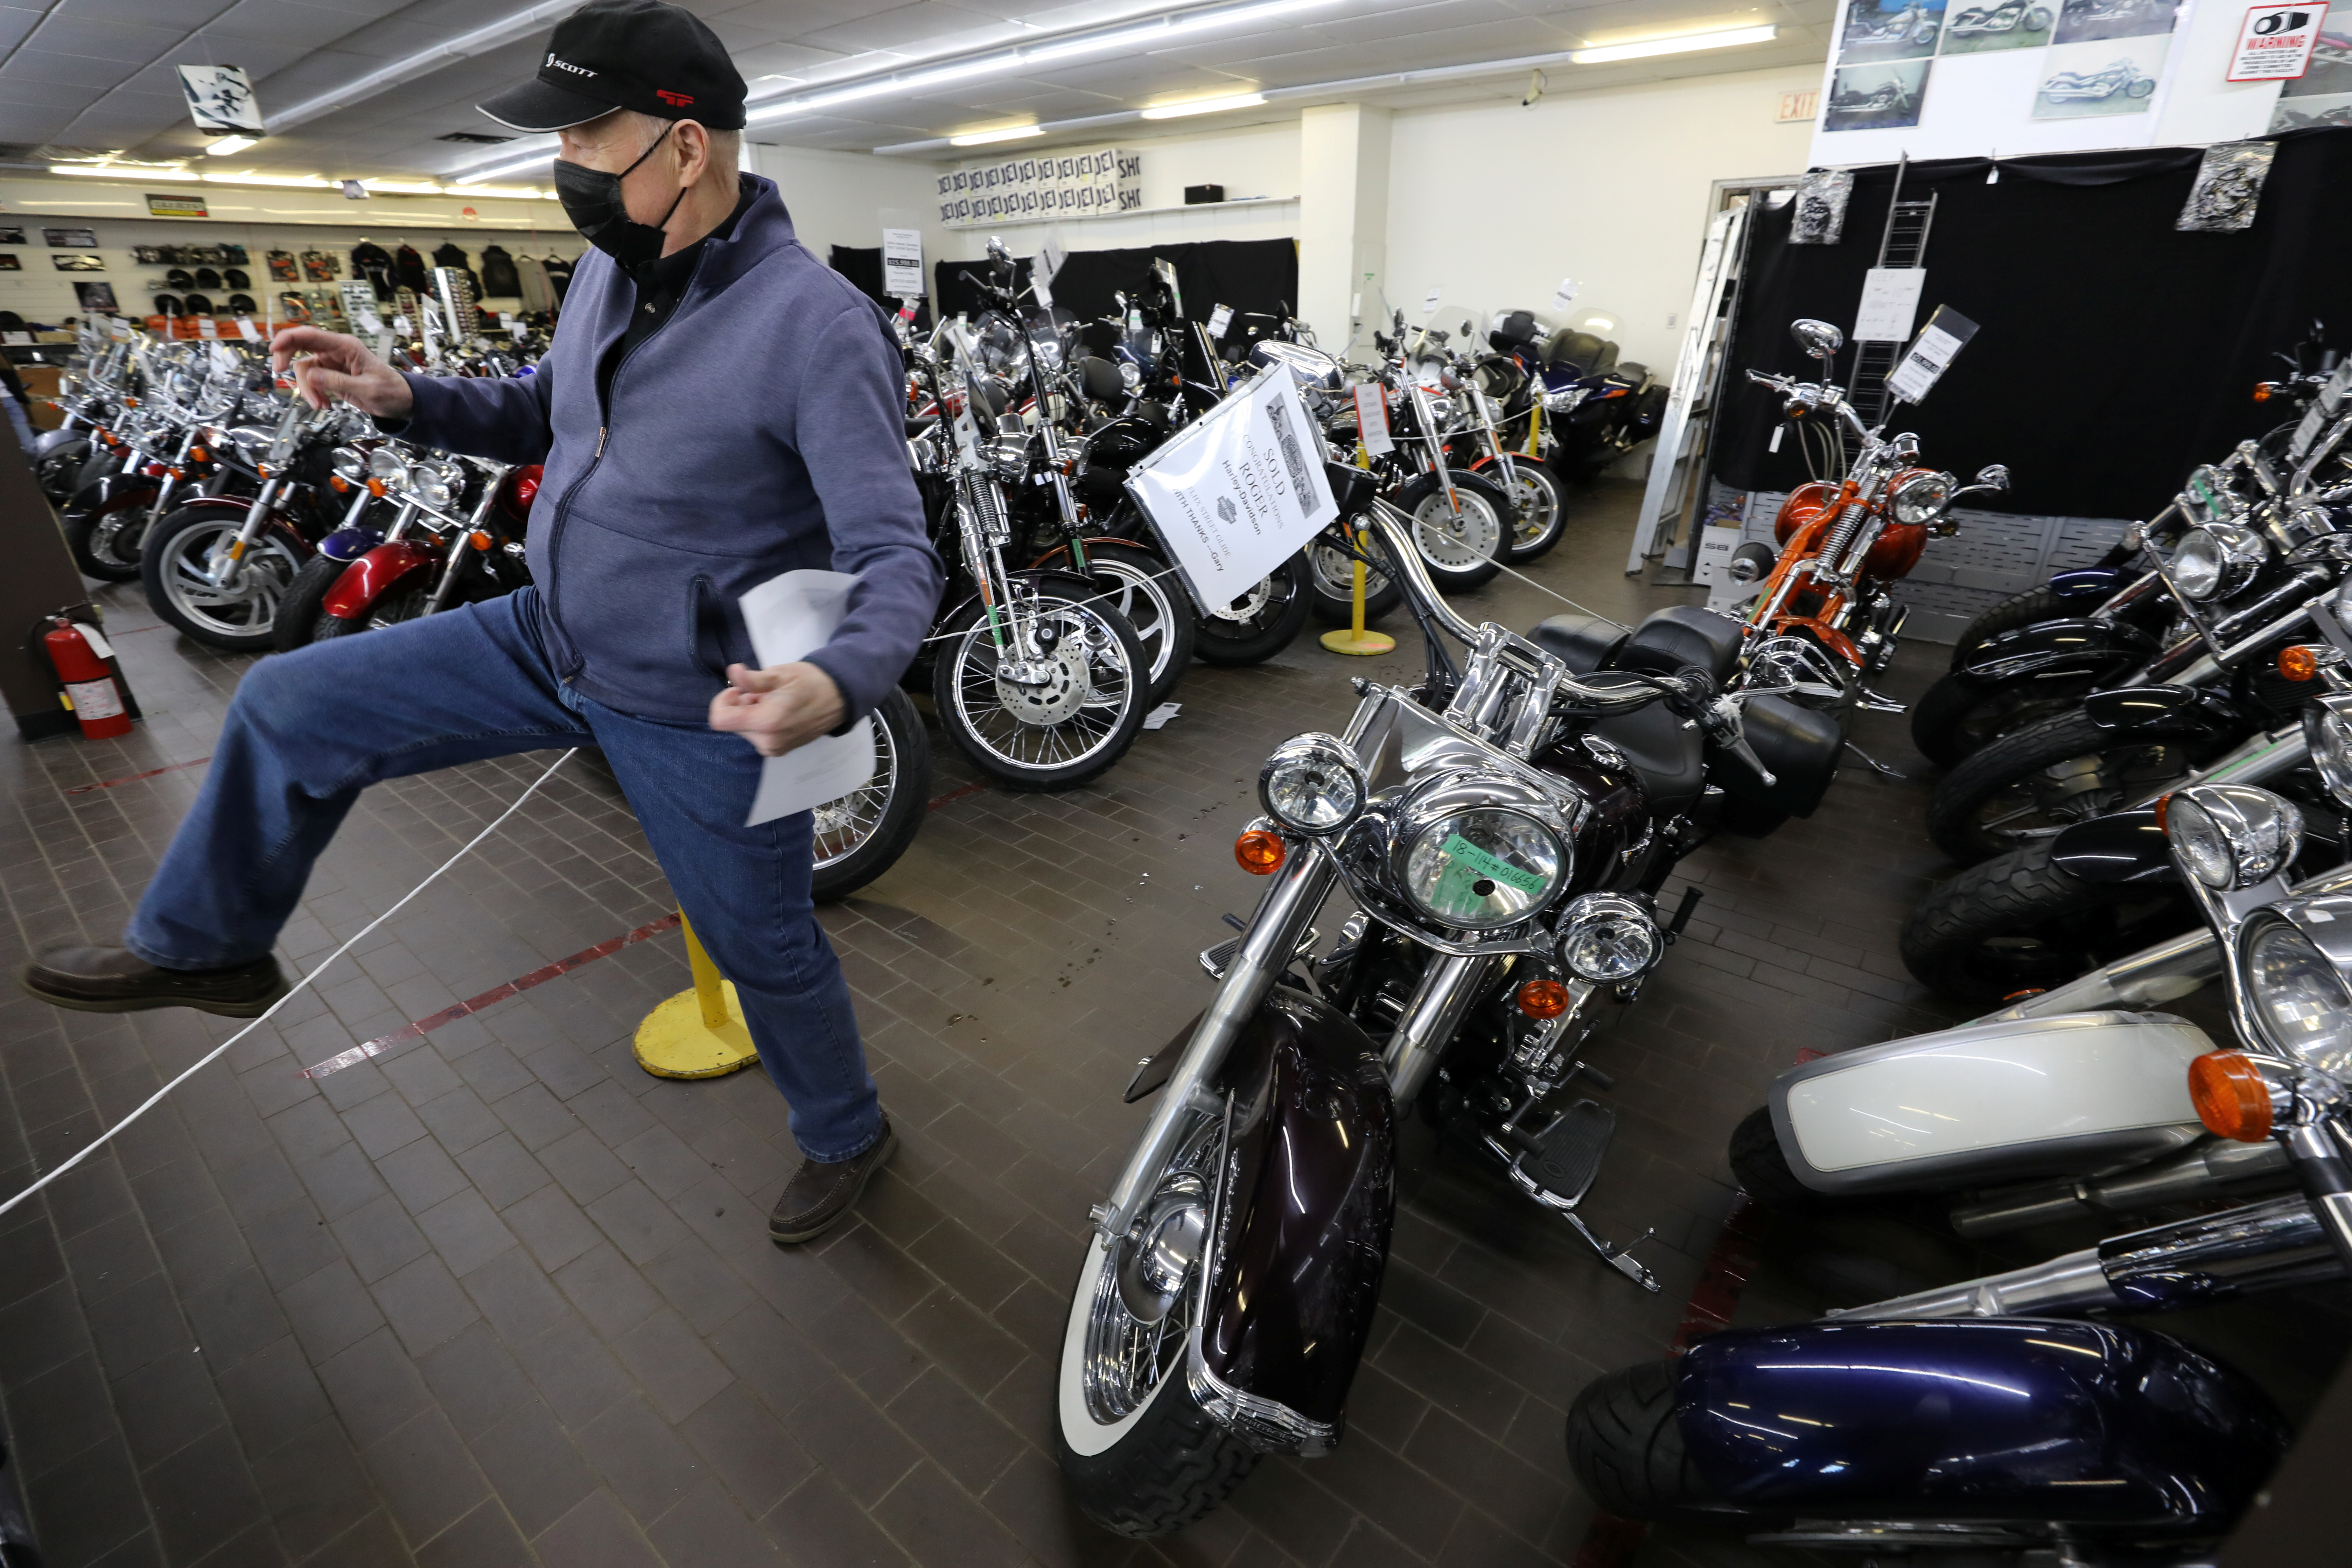 Gary Haines places SOLD signs on Harley Davidson motorcycles in Toronto